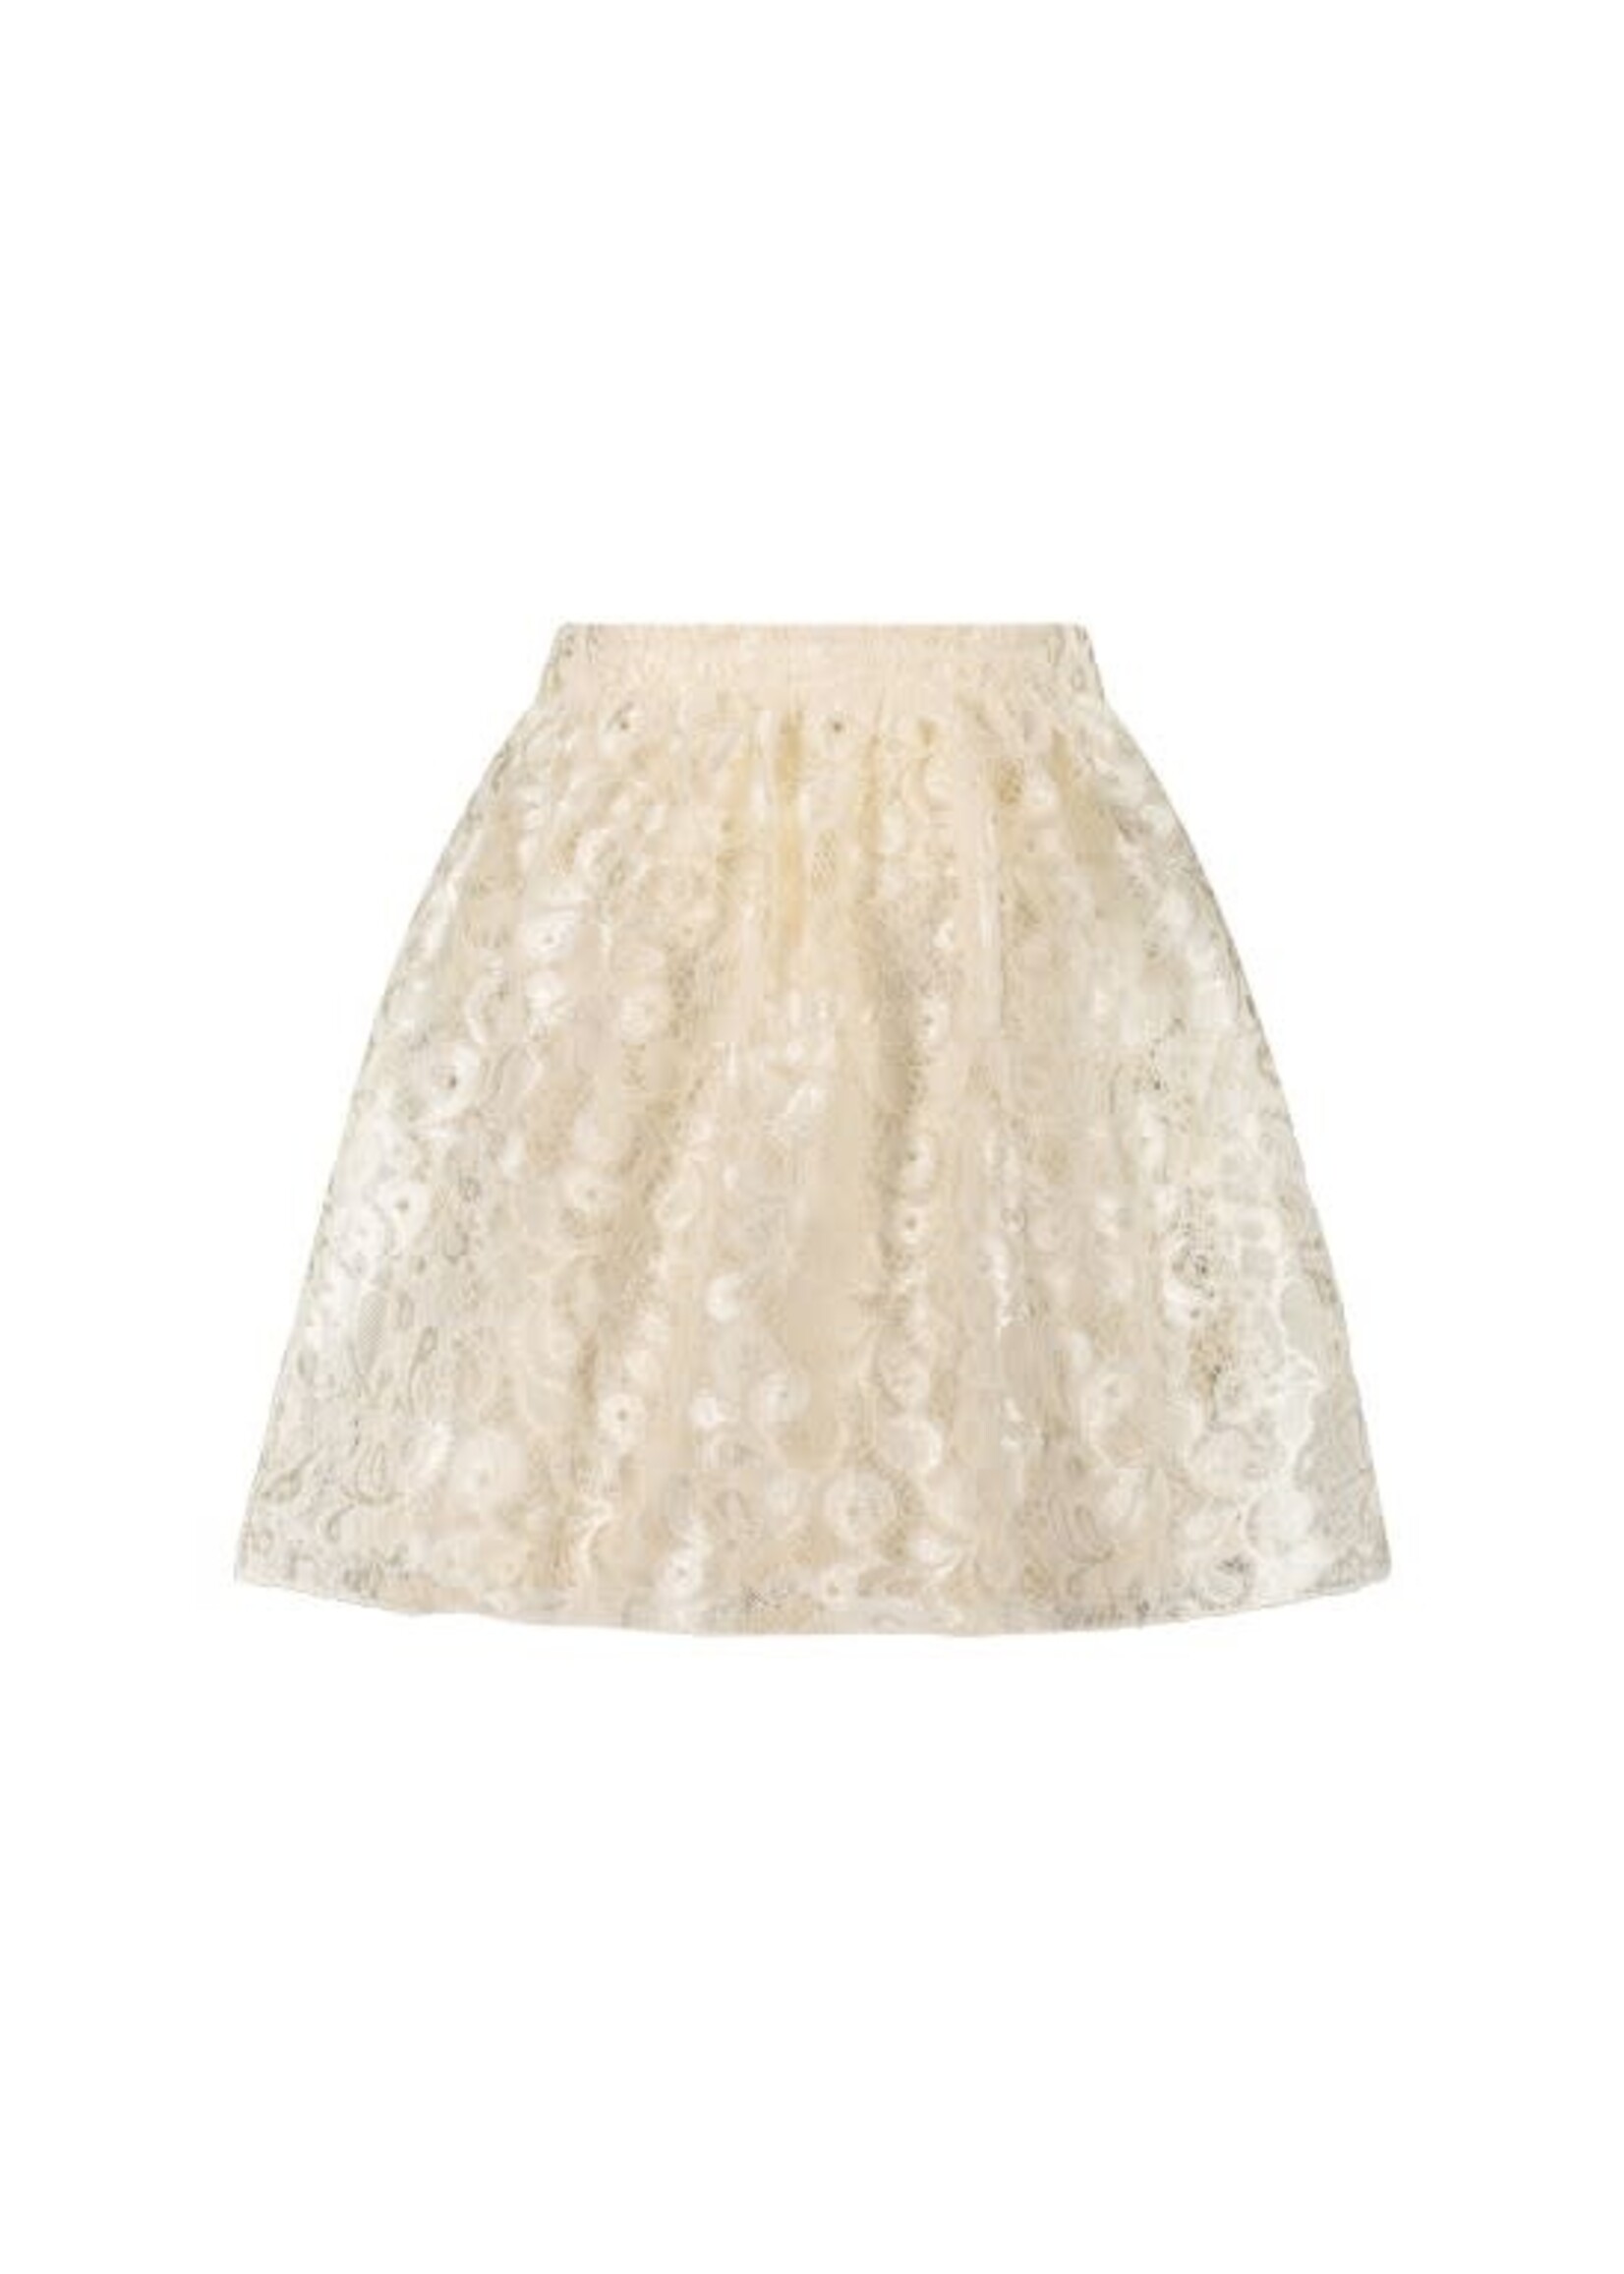 Le Chic Le Chic TRUTHY lace & pearls skirt C312-5708 Oatmeal Elite